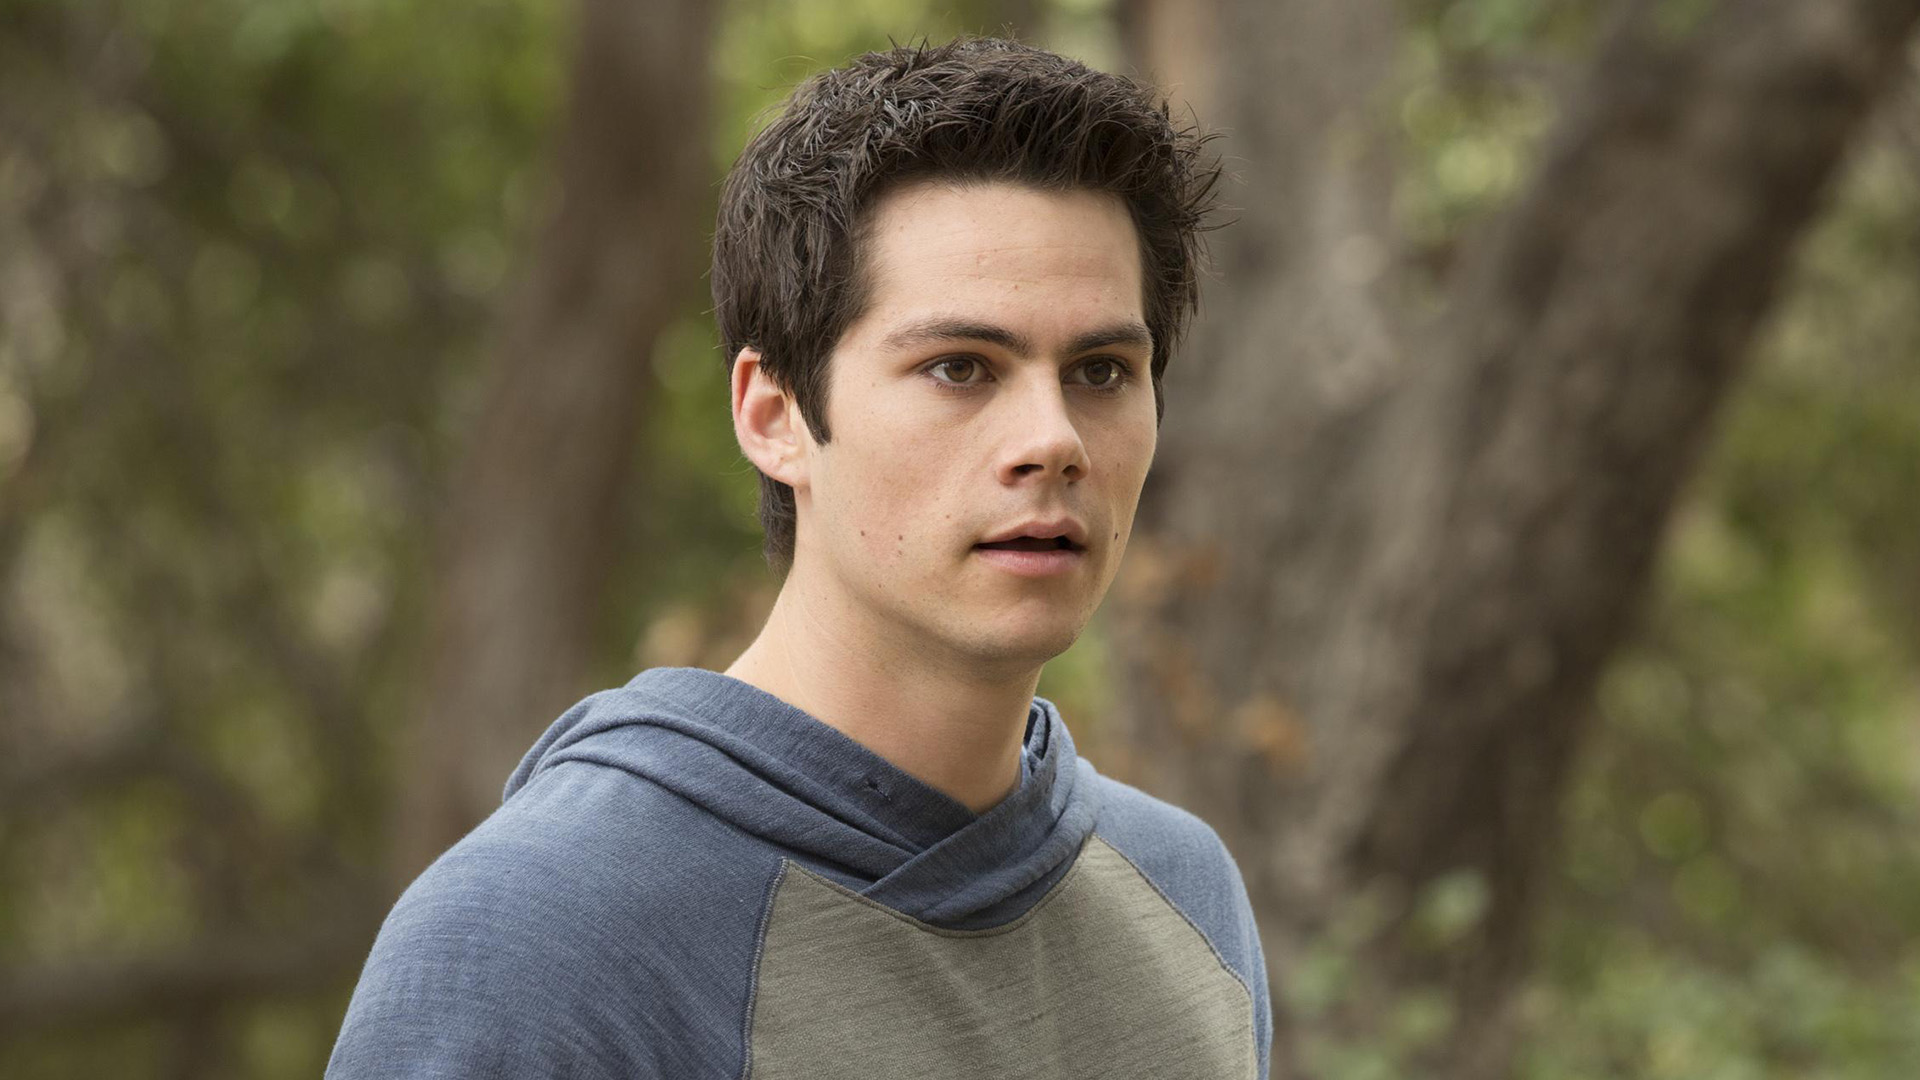 Stiles' Haircut Change Still Bugs Teen Wolf Fans After All These Years